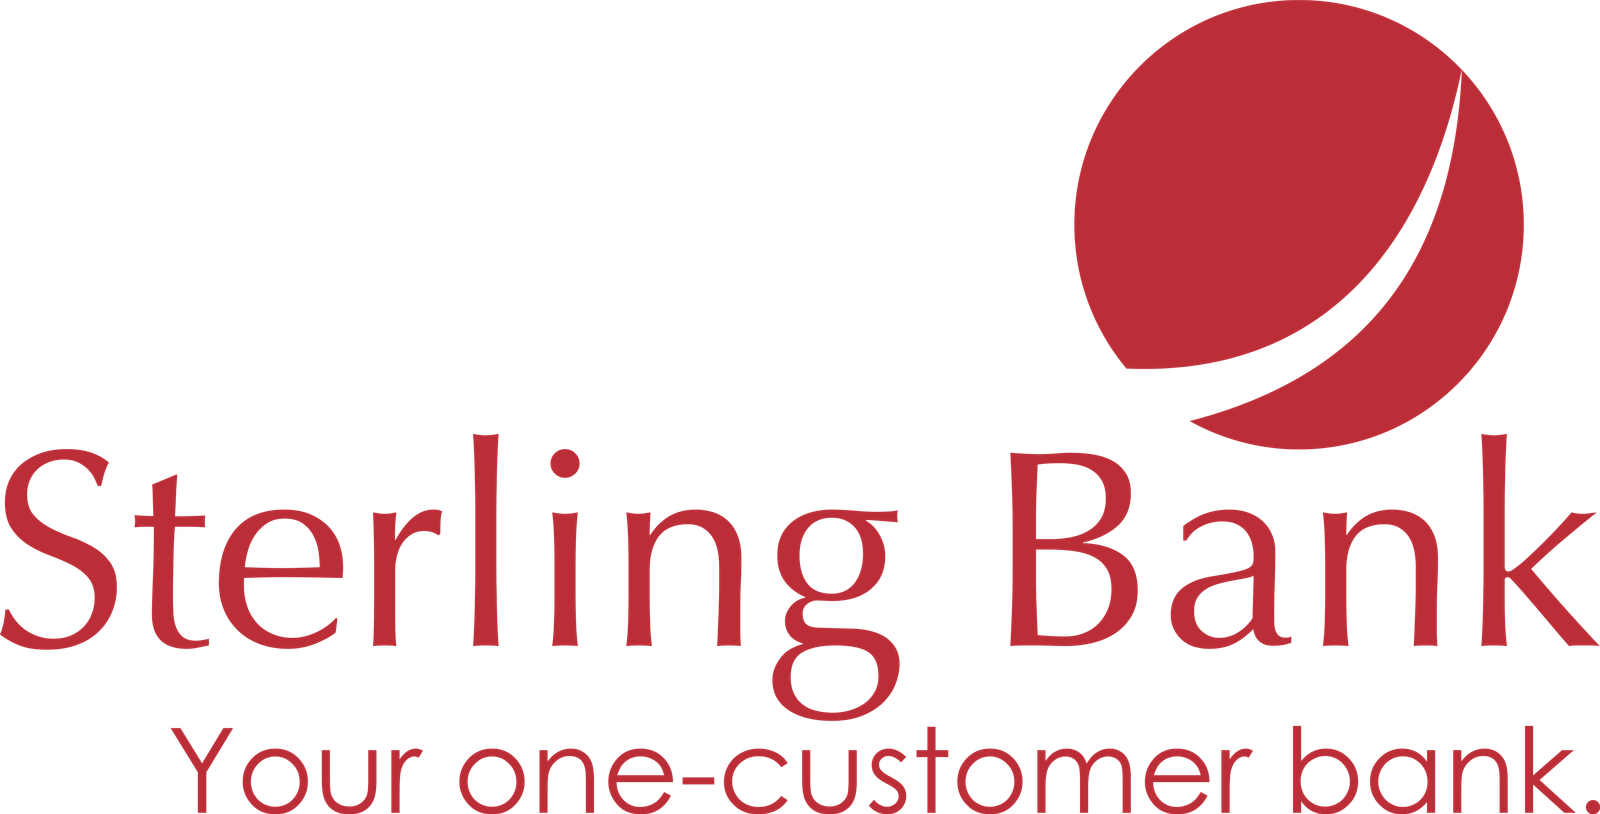 Sterling Bank to increase branch networks, says no merger/acquisition for now